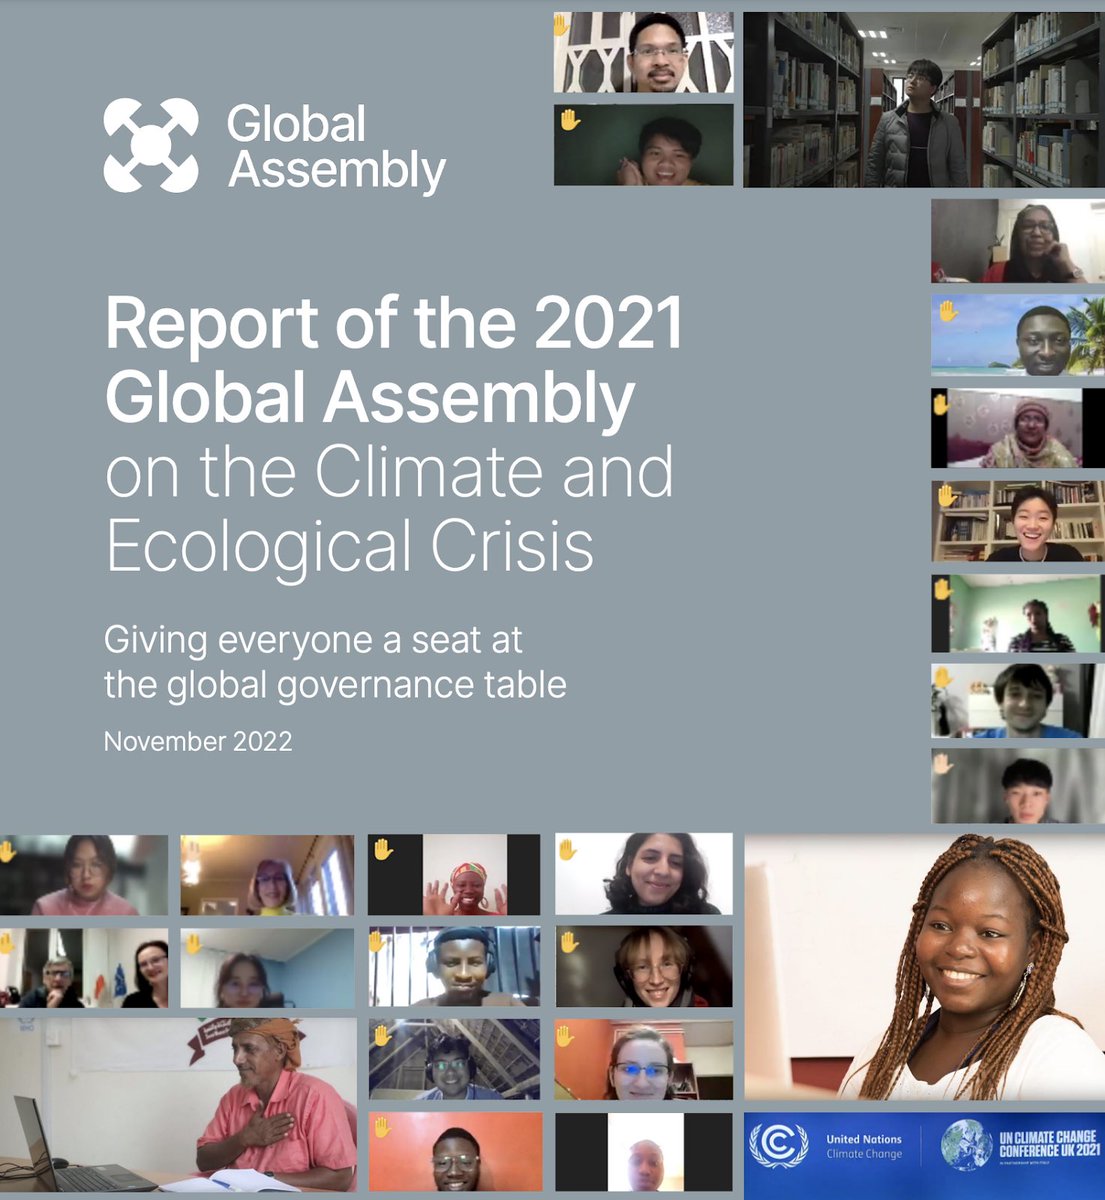 We’re excited to publish the Report of the 2021 #GlobalAssembly, detailing how we ran the first global citizens’ assembly and what we learned from it. You can find the Report & supplementary resources at: globalassembly.org/report #COP27 (More in🧵below) (1/8)